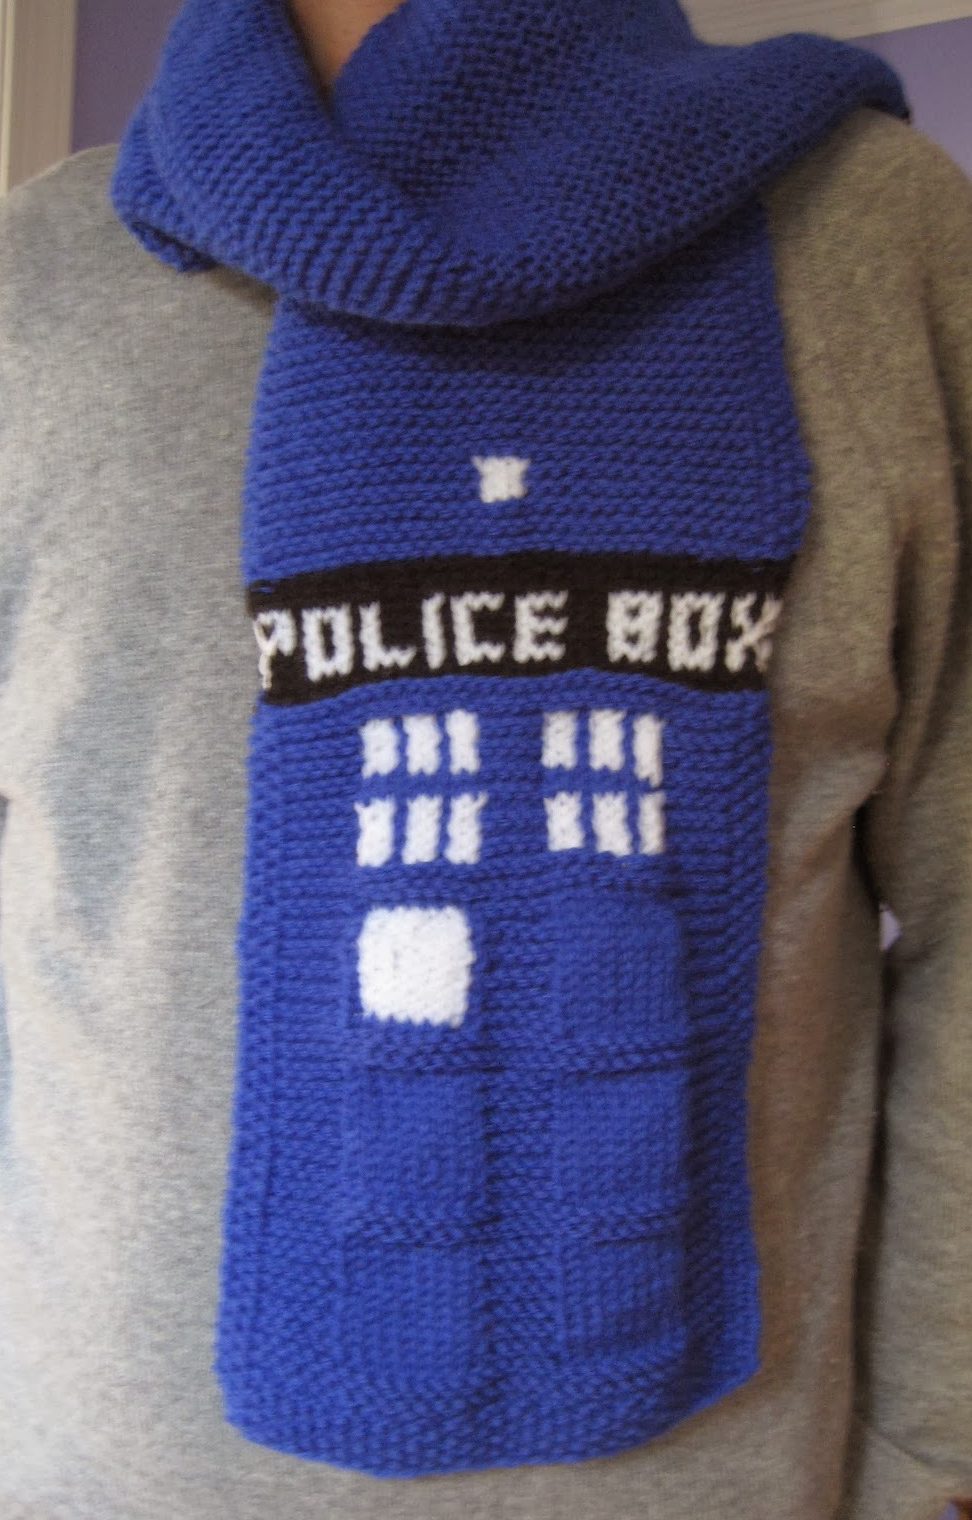 Doctor Who Knitting Patterns | In the Loop Knitting